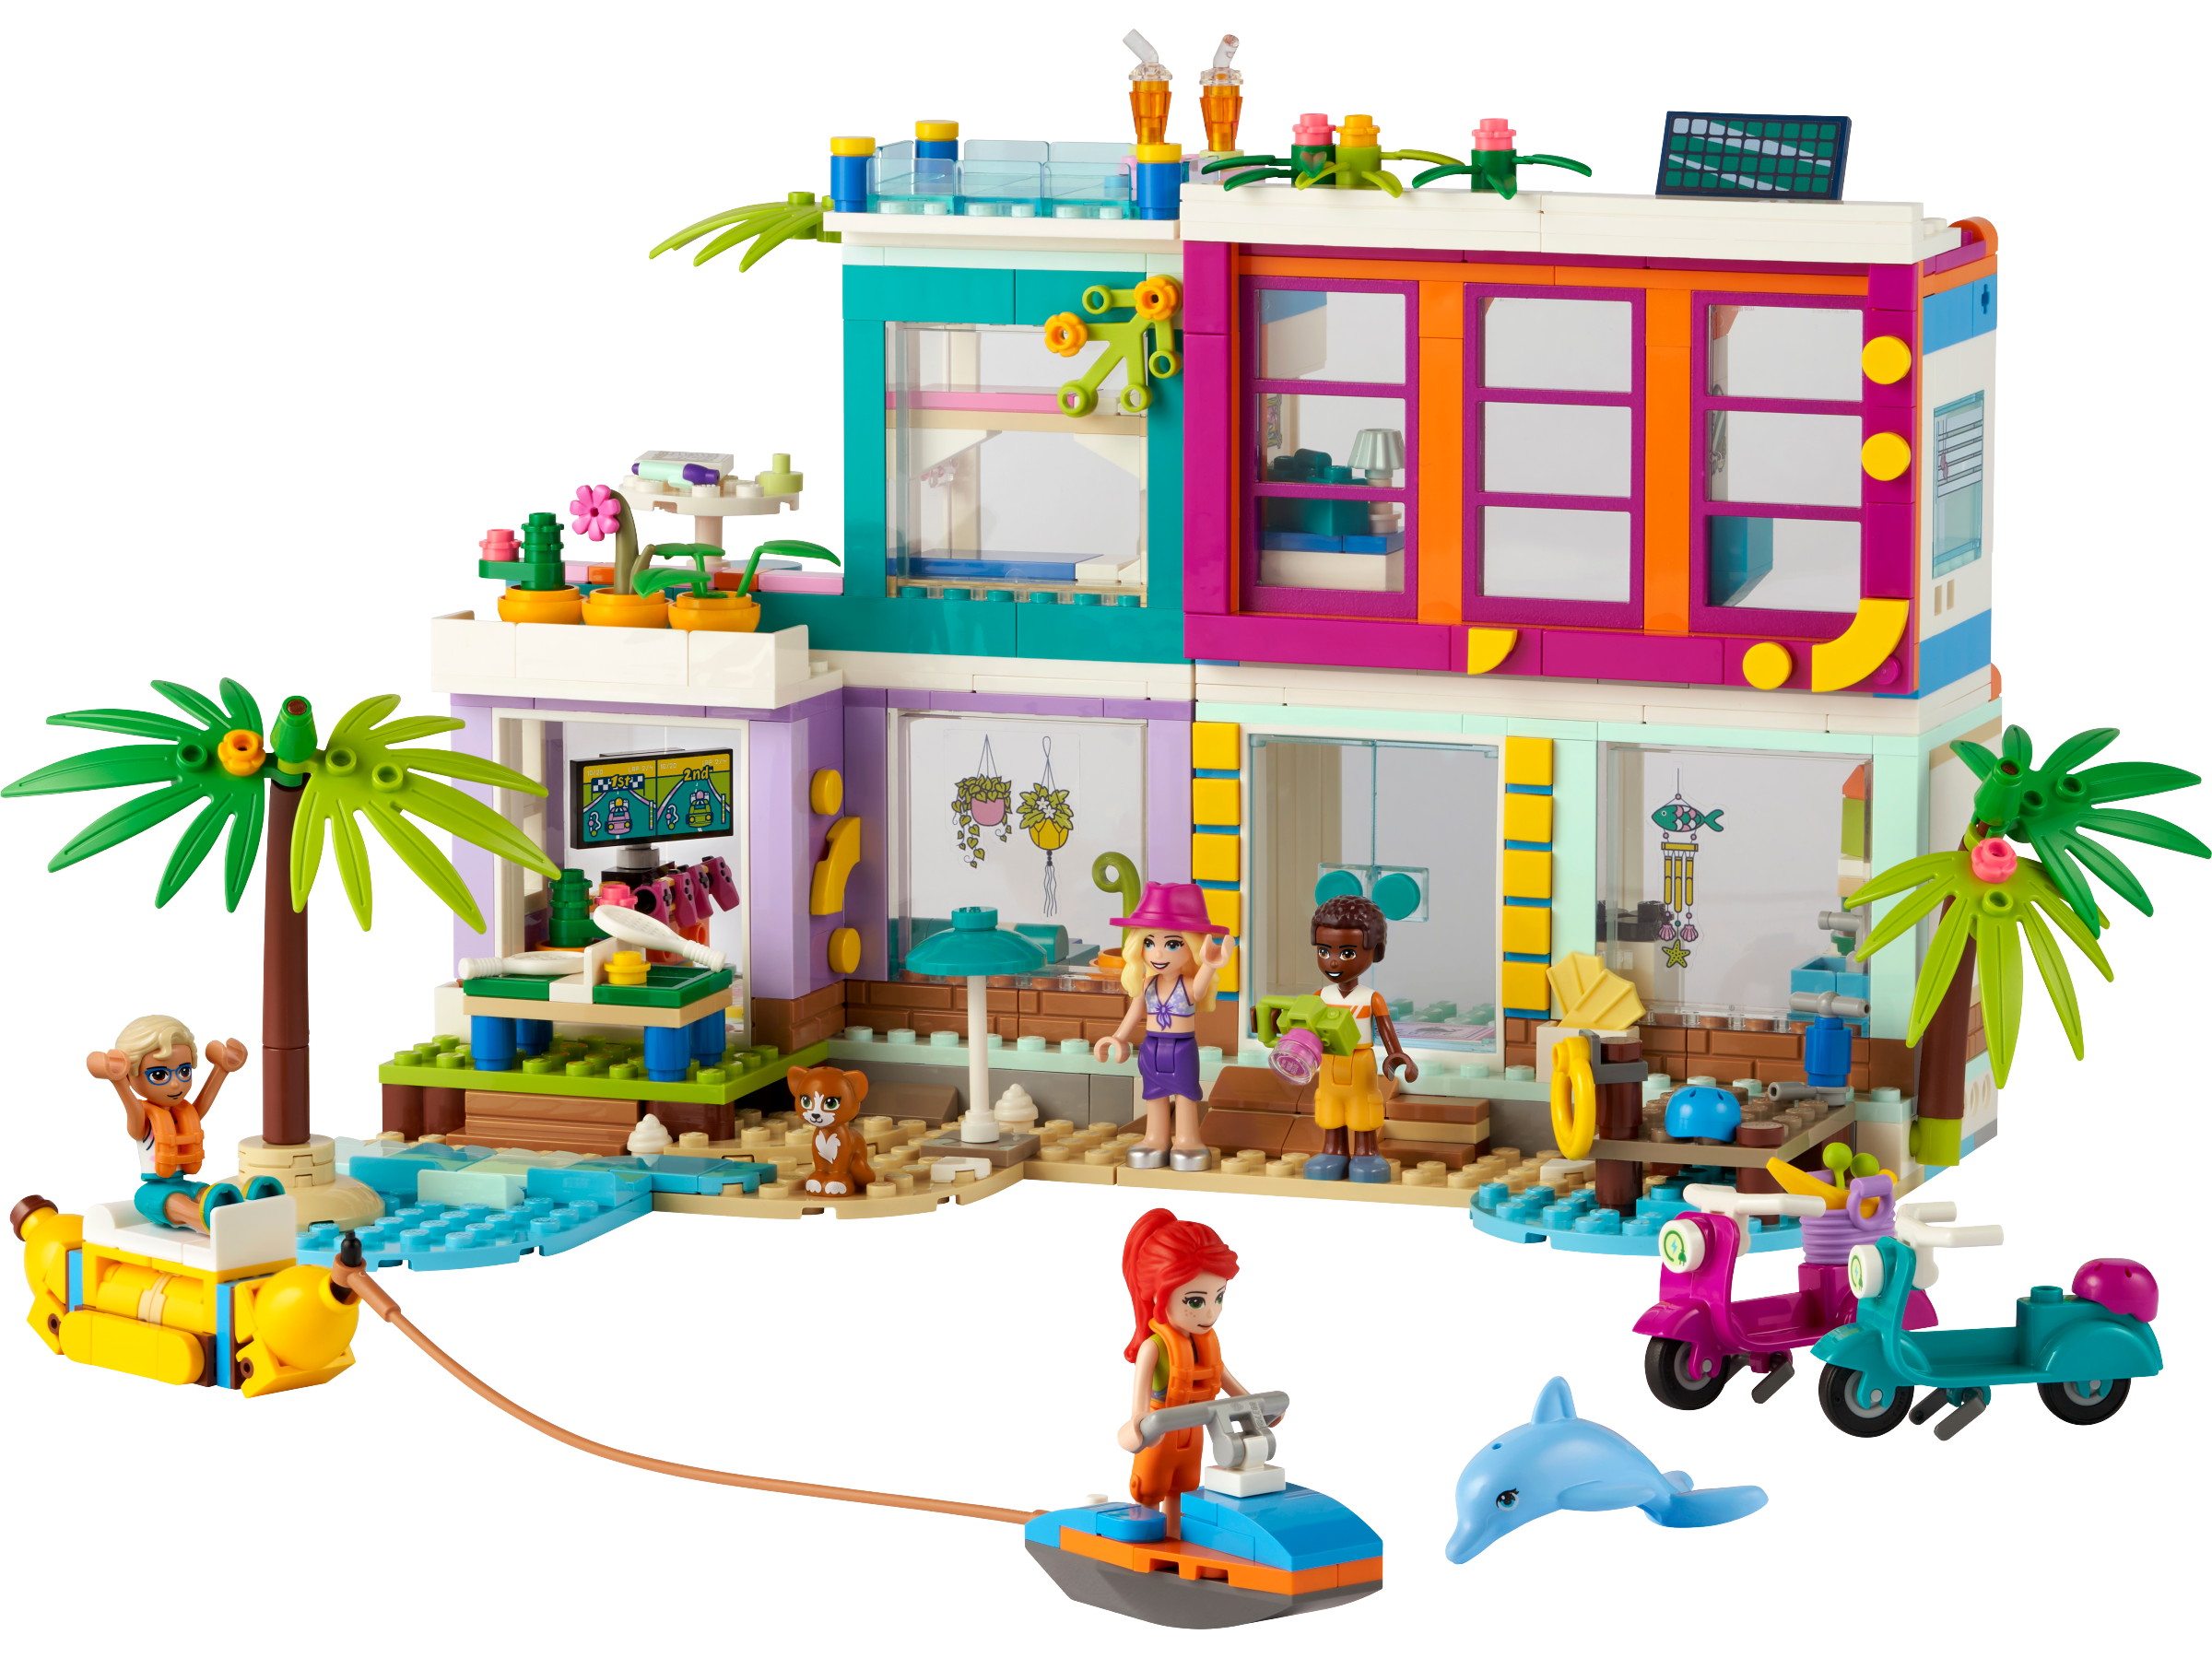 Vacation Beach House 41709 | Friends Buy online at the Official LEGO® Shop